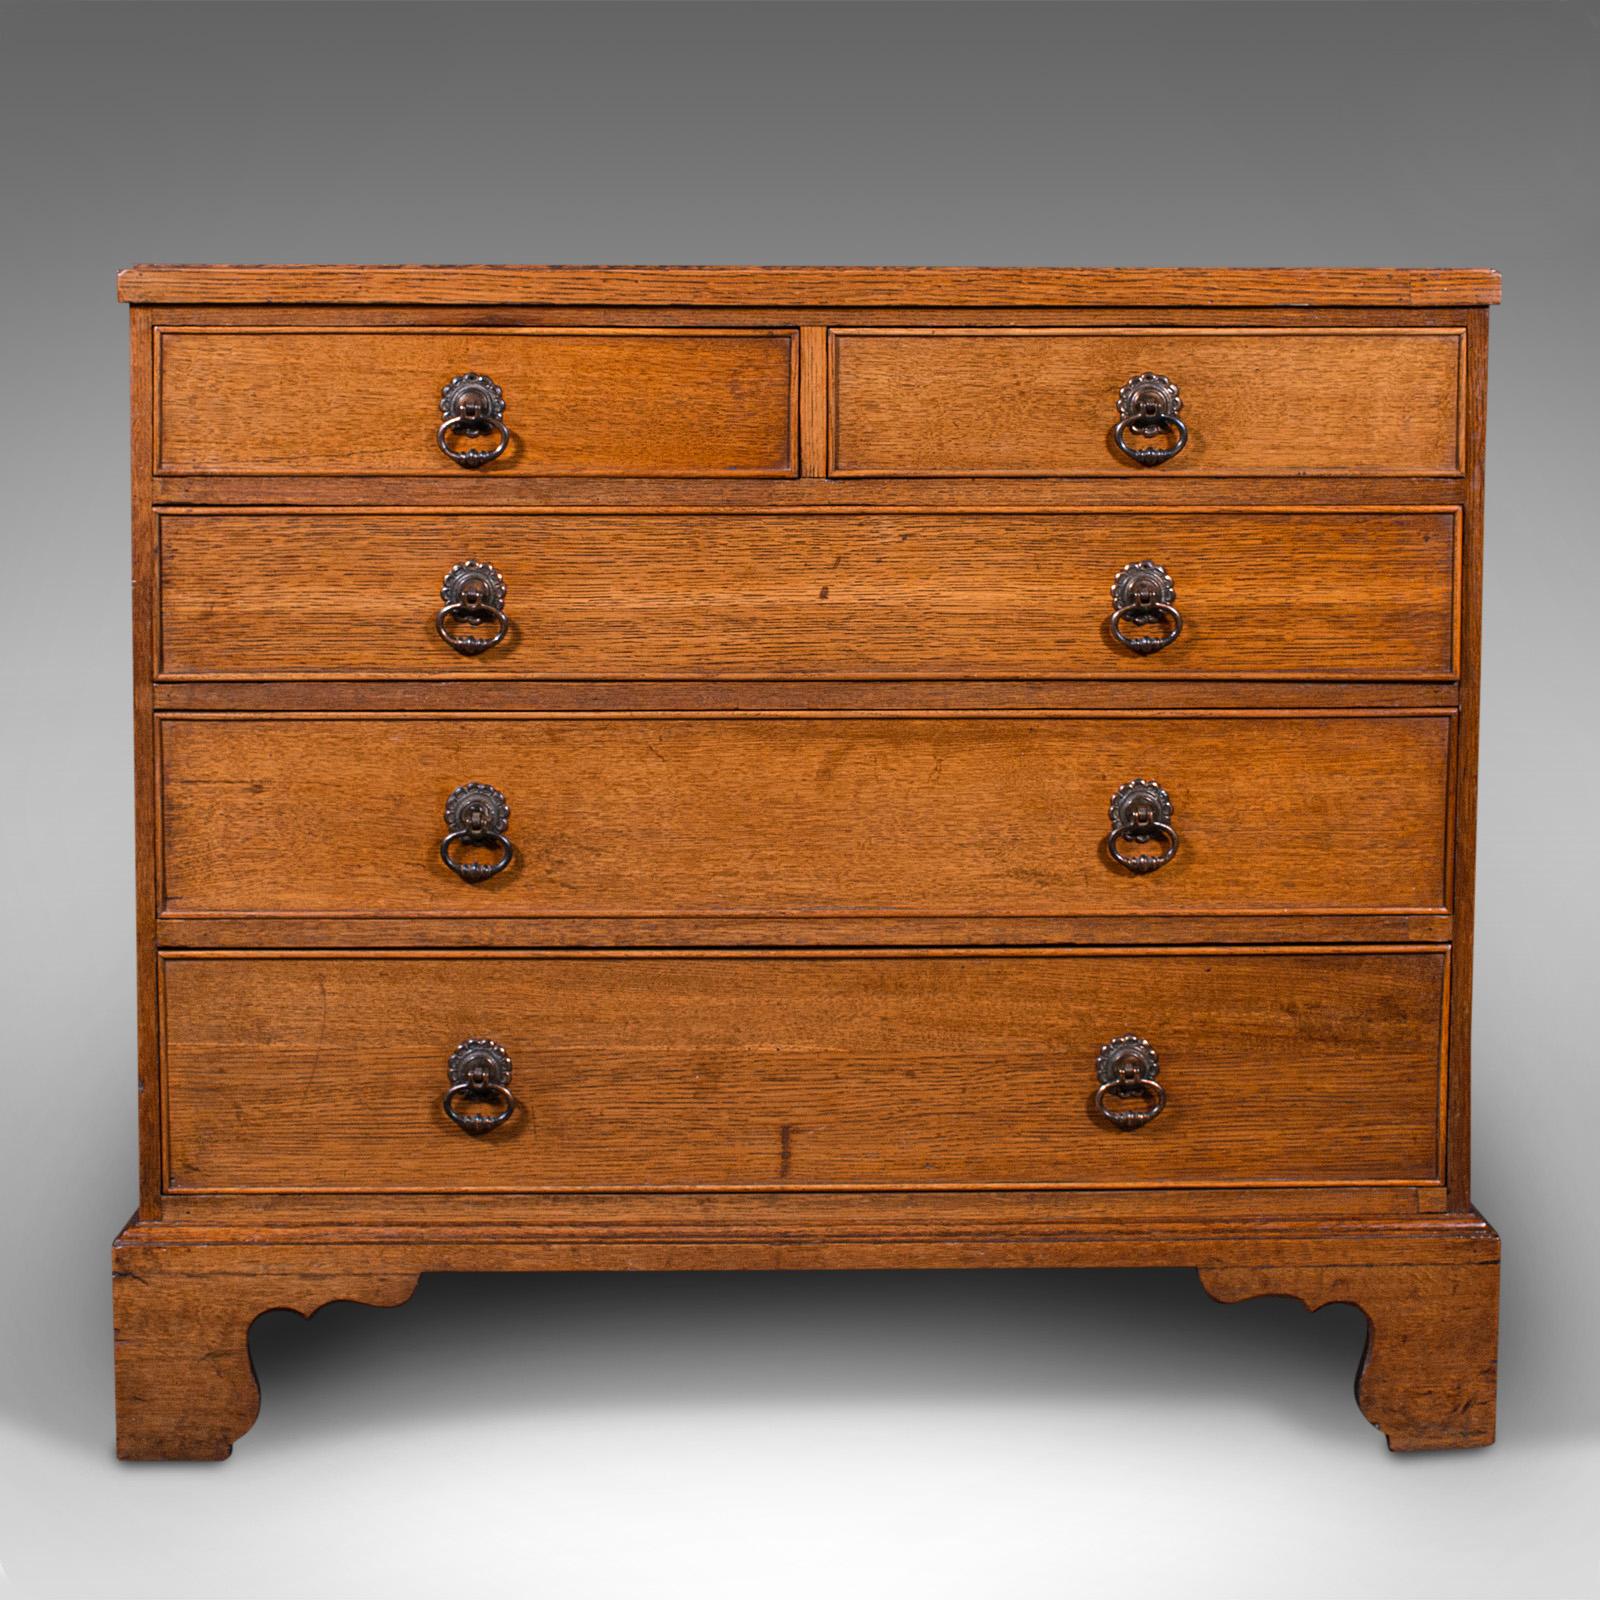 gentleman's chest of drawers